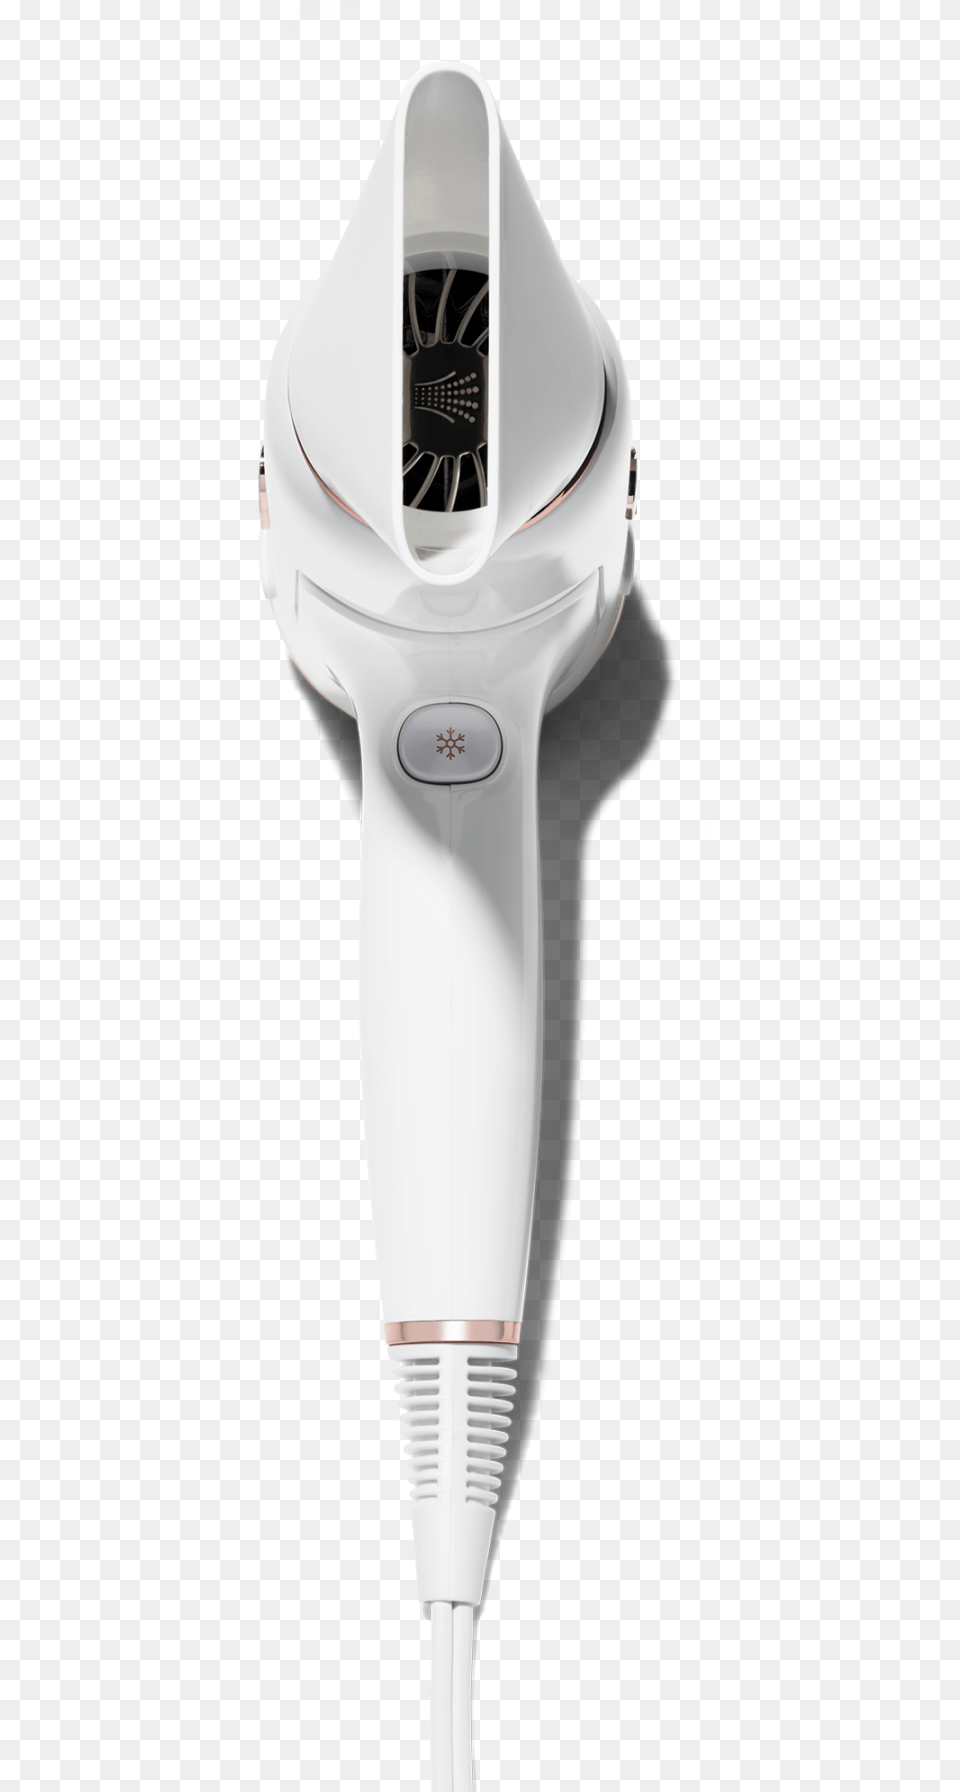 Cura Image 8class Gallery Imagesrc Https Hair Dryer, Appliance, Device, Electrical Device, Blow Dryer Free Transparent Png